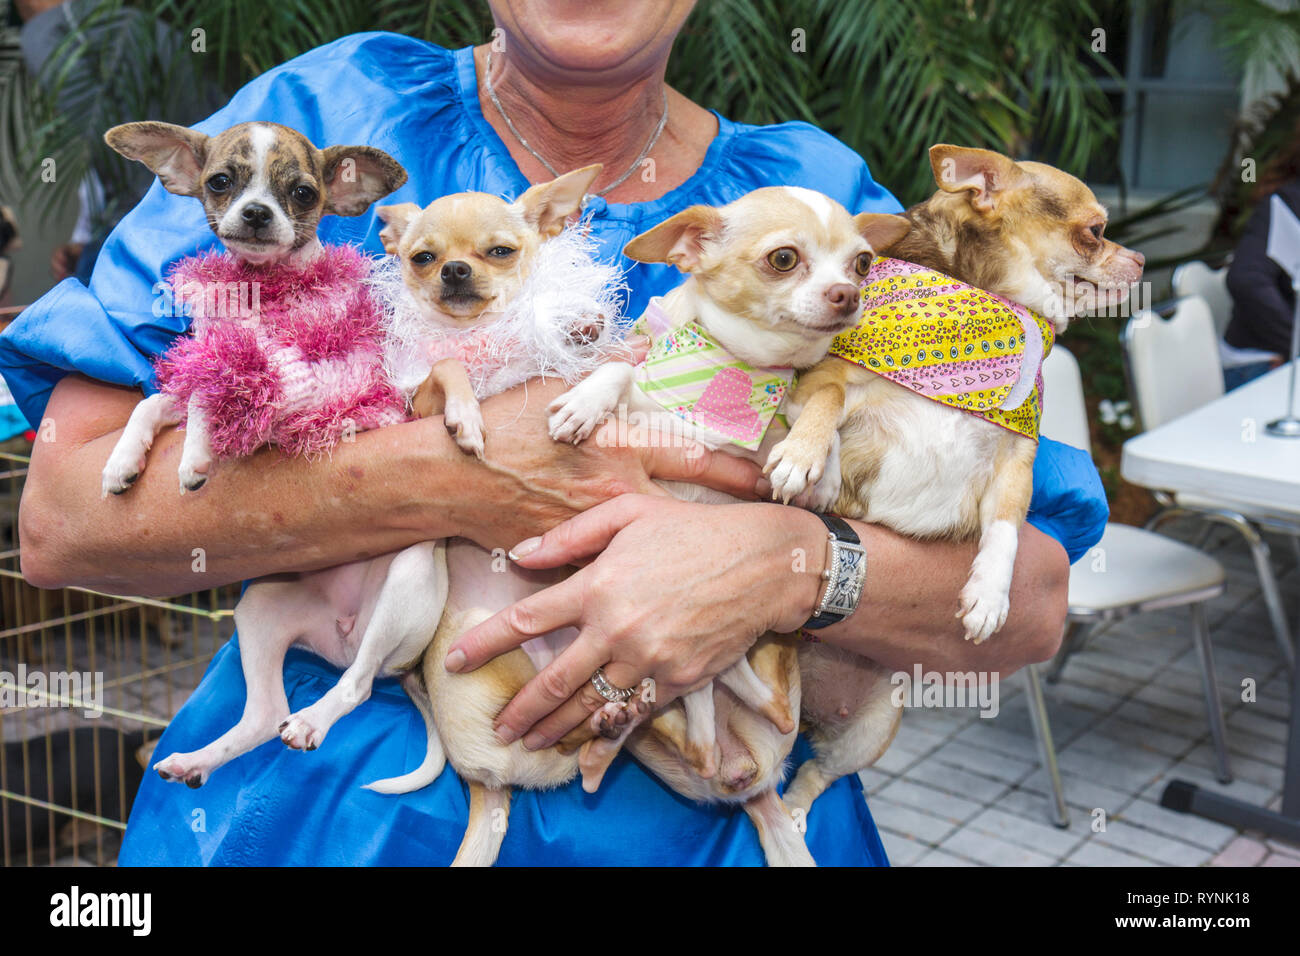 Miami Florida,Temple Israel,Bow Wow Palooza Interfaith Blessing of the Animals,owner,dog,four dogs,pet,Chihuahua,toy breed,woman female women,holding Stock Photo